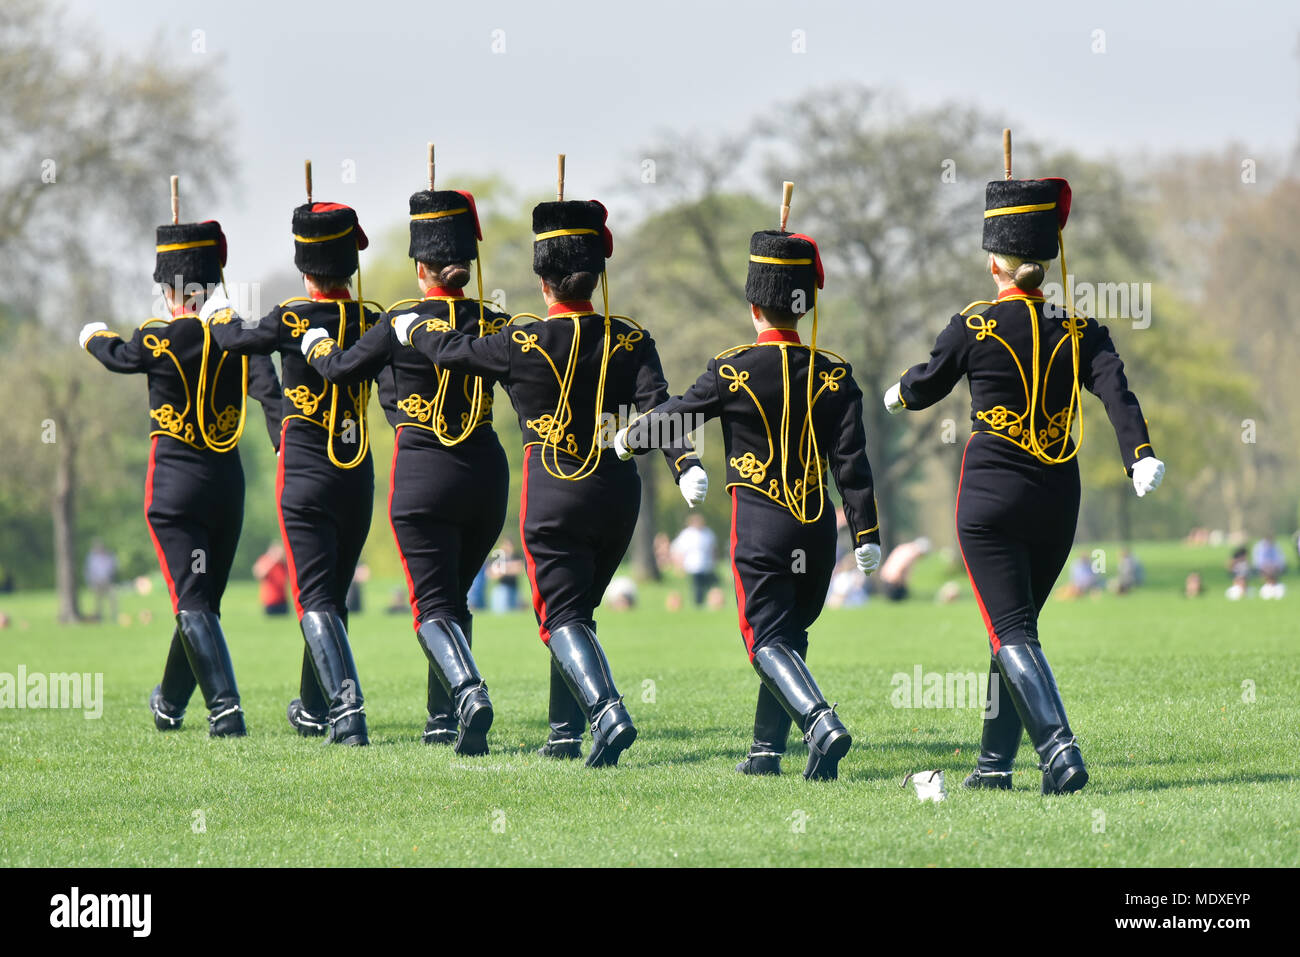 Hyde Park, London, UK. 21st April 2018. The King's Troop Royal Horse Artillery fire a 41 gun salute to mark the Queen's 92nd birthday. Credit: Matthew Chattle/Alamy Live News Credit: Matthew Chattle/Alamy Live News Stock Photo